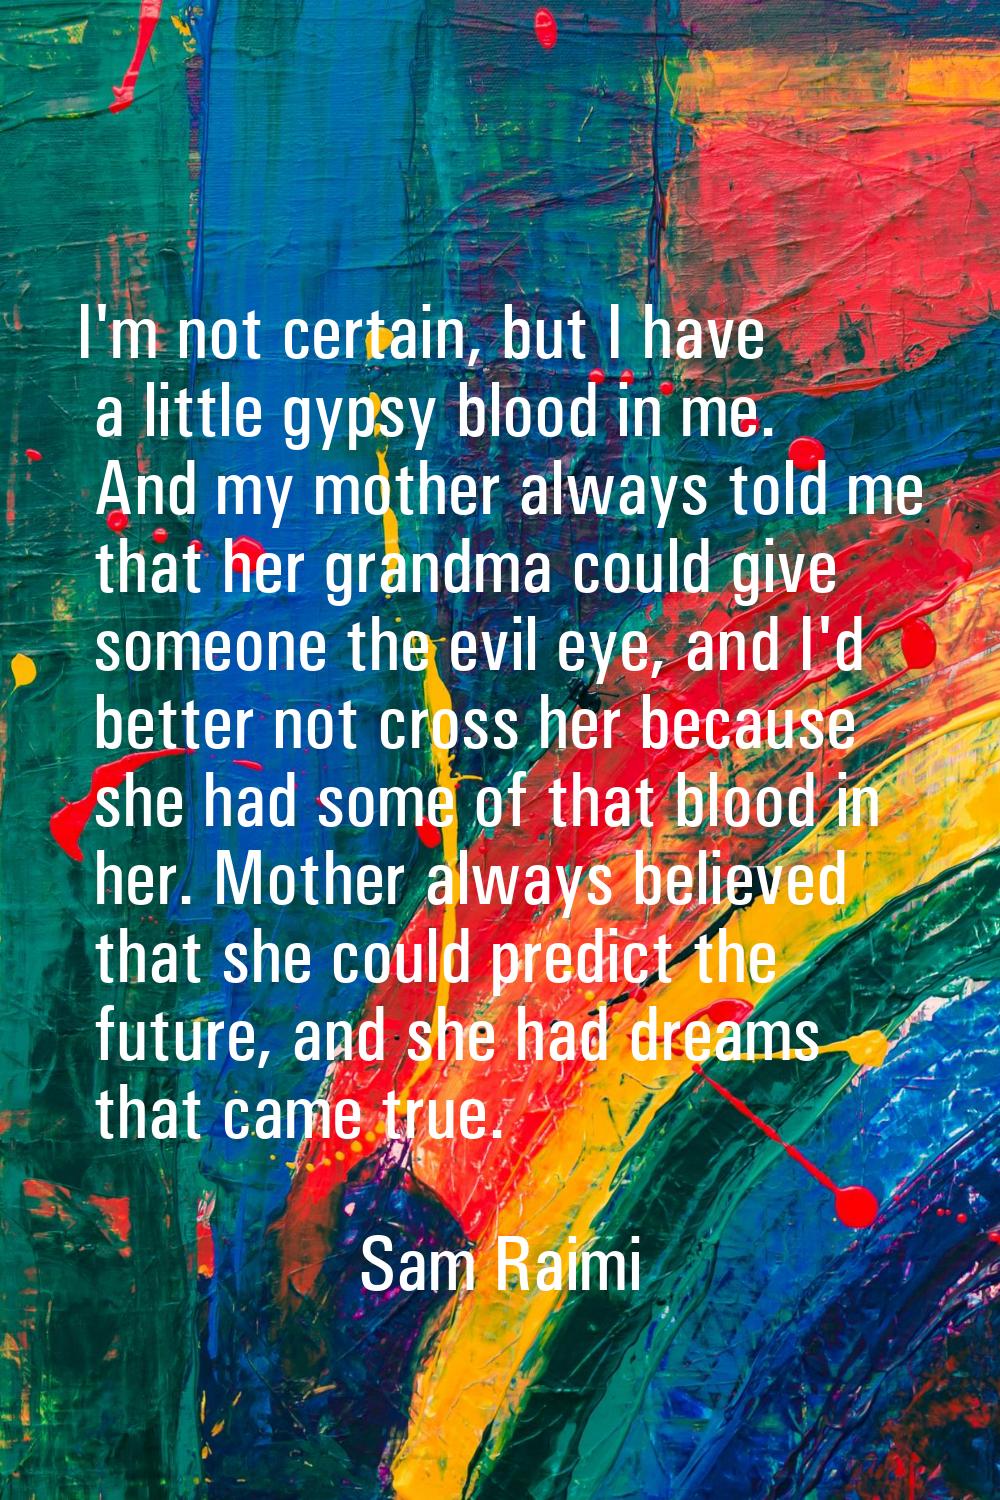 I'm not certain, but I have a little gypsy blood in me. And my mother always told me that her grand